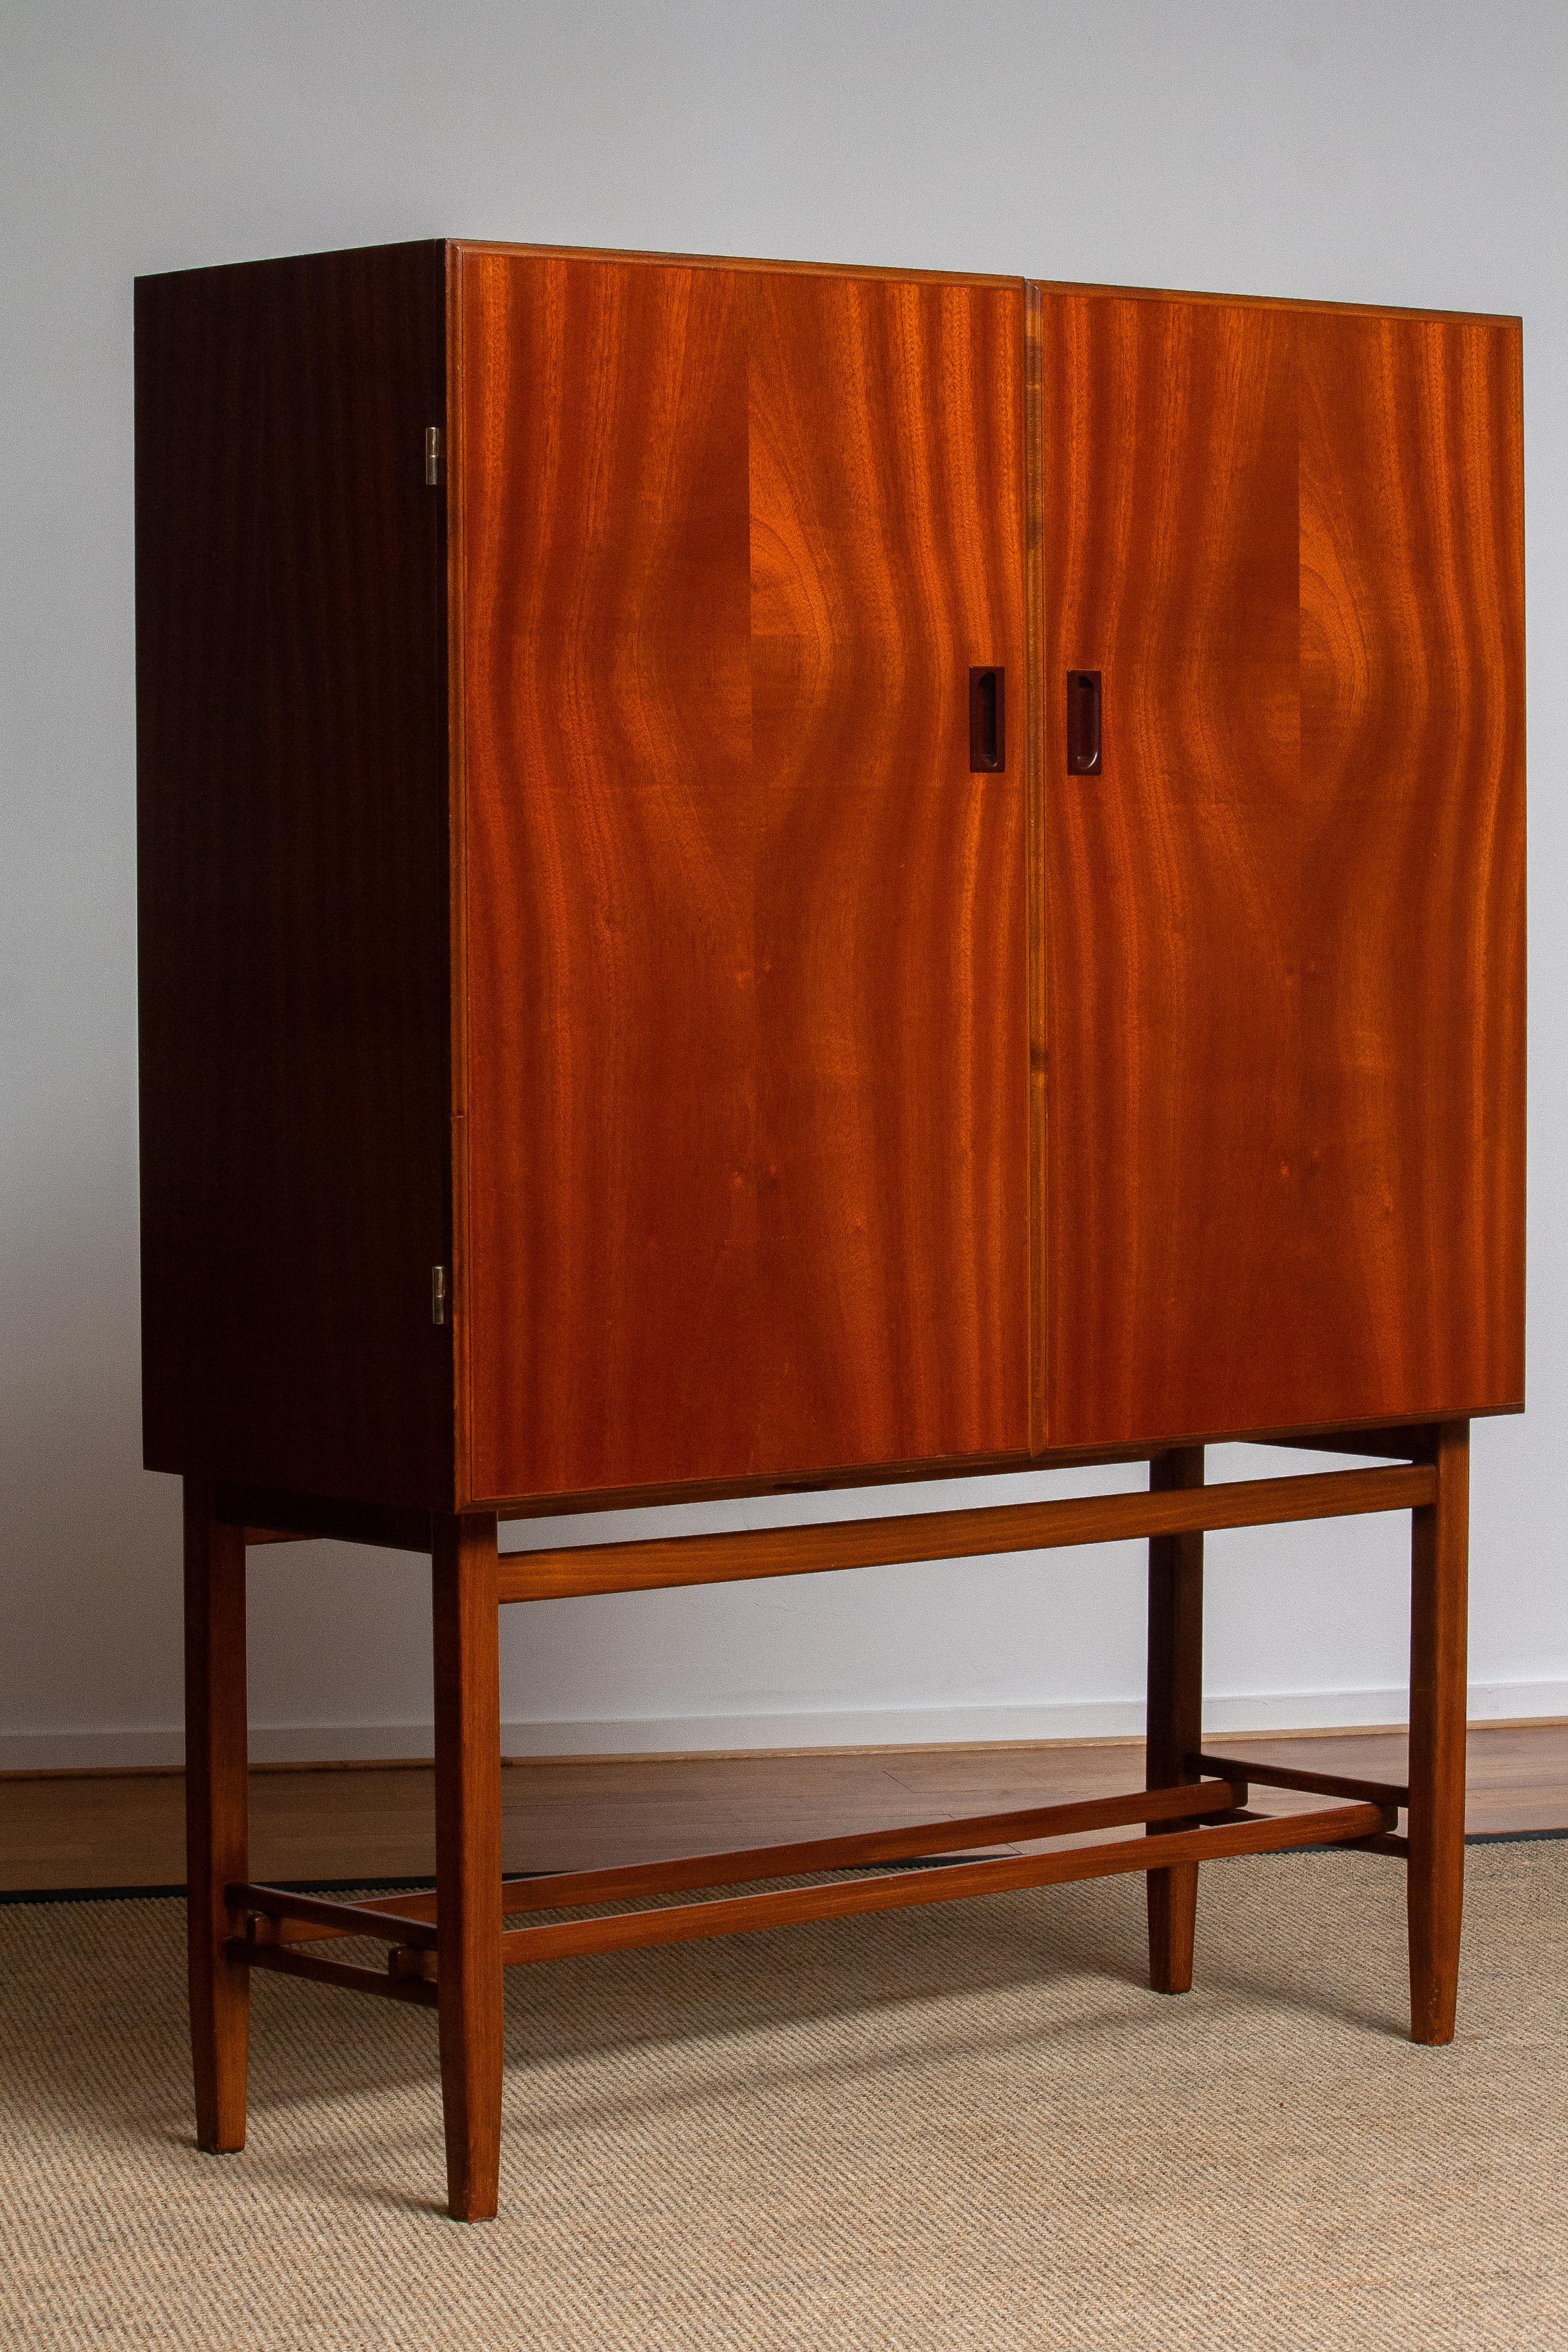 Brass 1950s, Slim Midcentury Mahogany Dry Bar or Cabinet by Forenades Mobler, Sweden